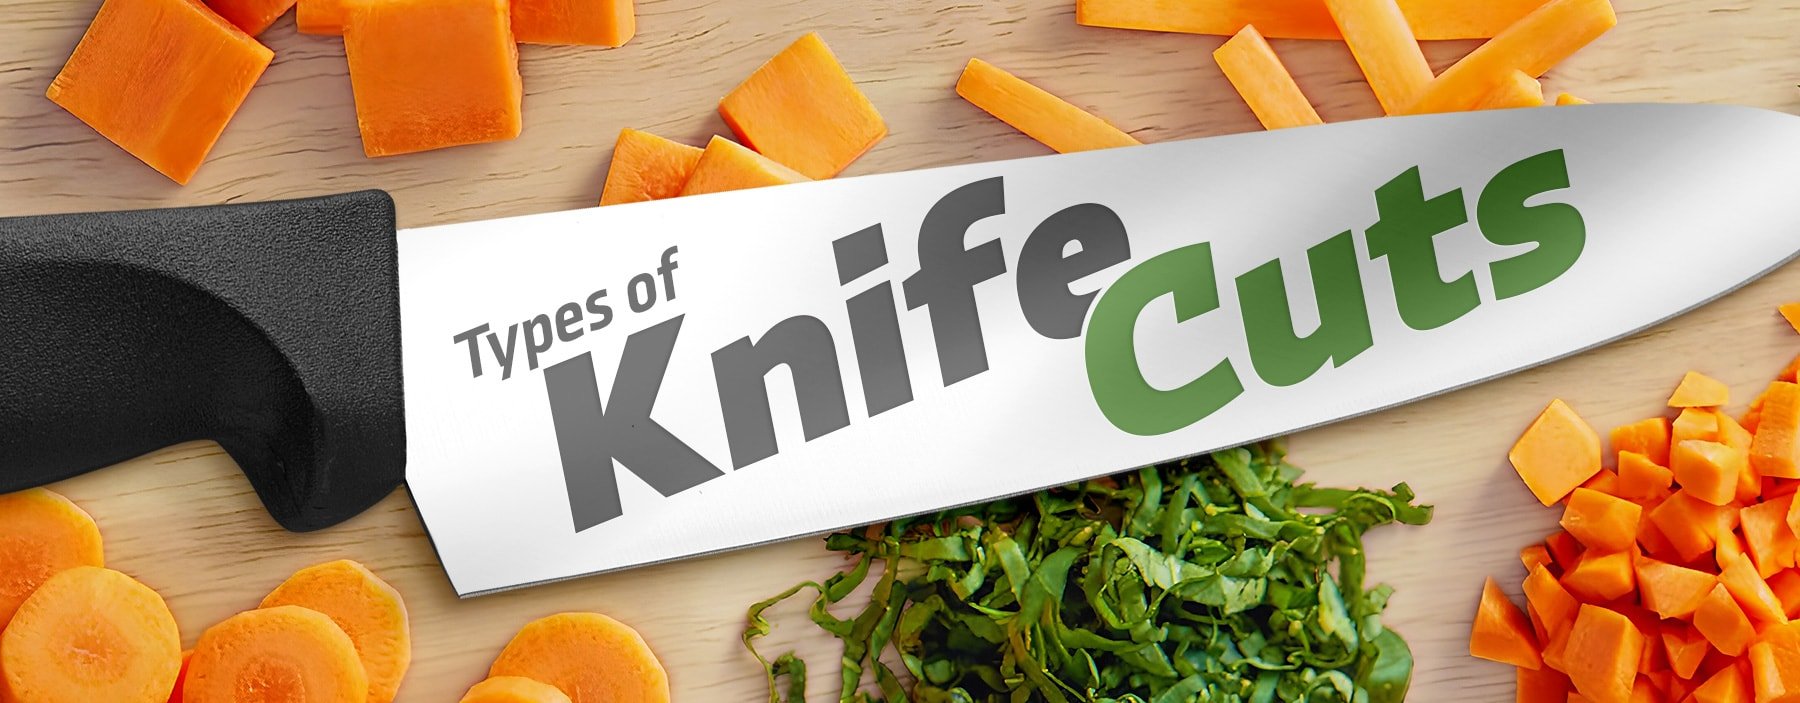 The Most Common Ways to Cut Vegetables + Their Meanings